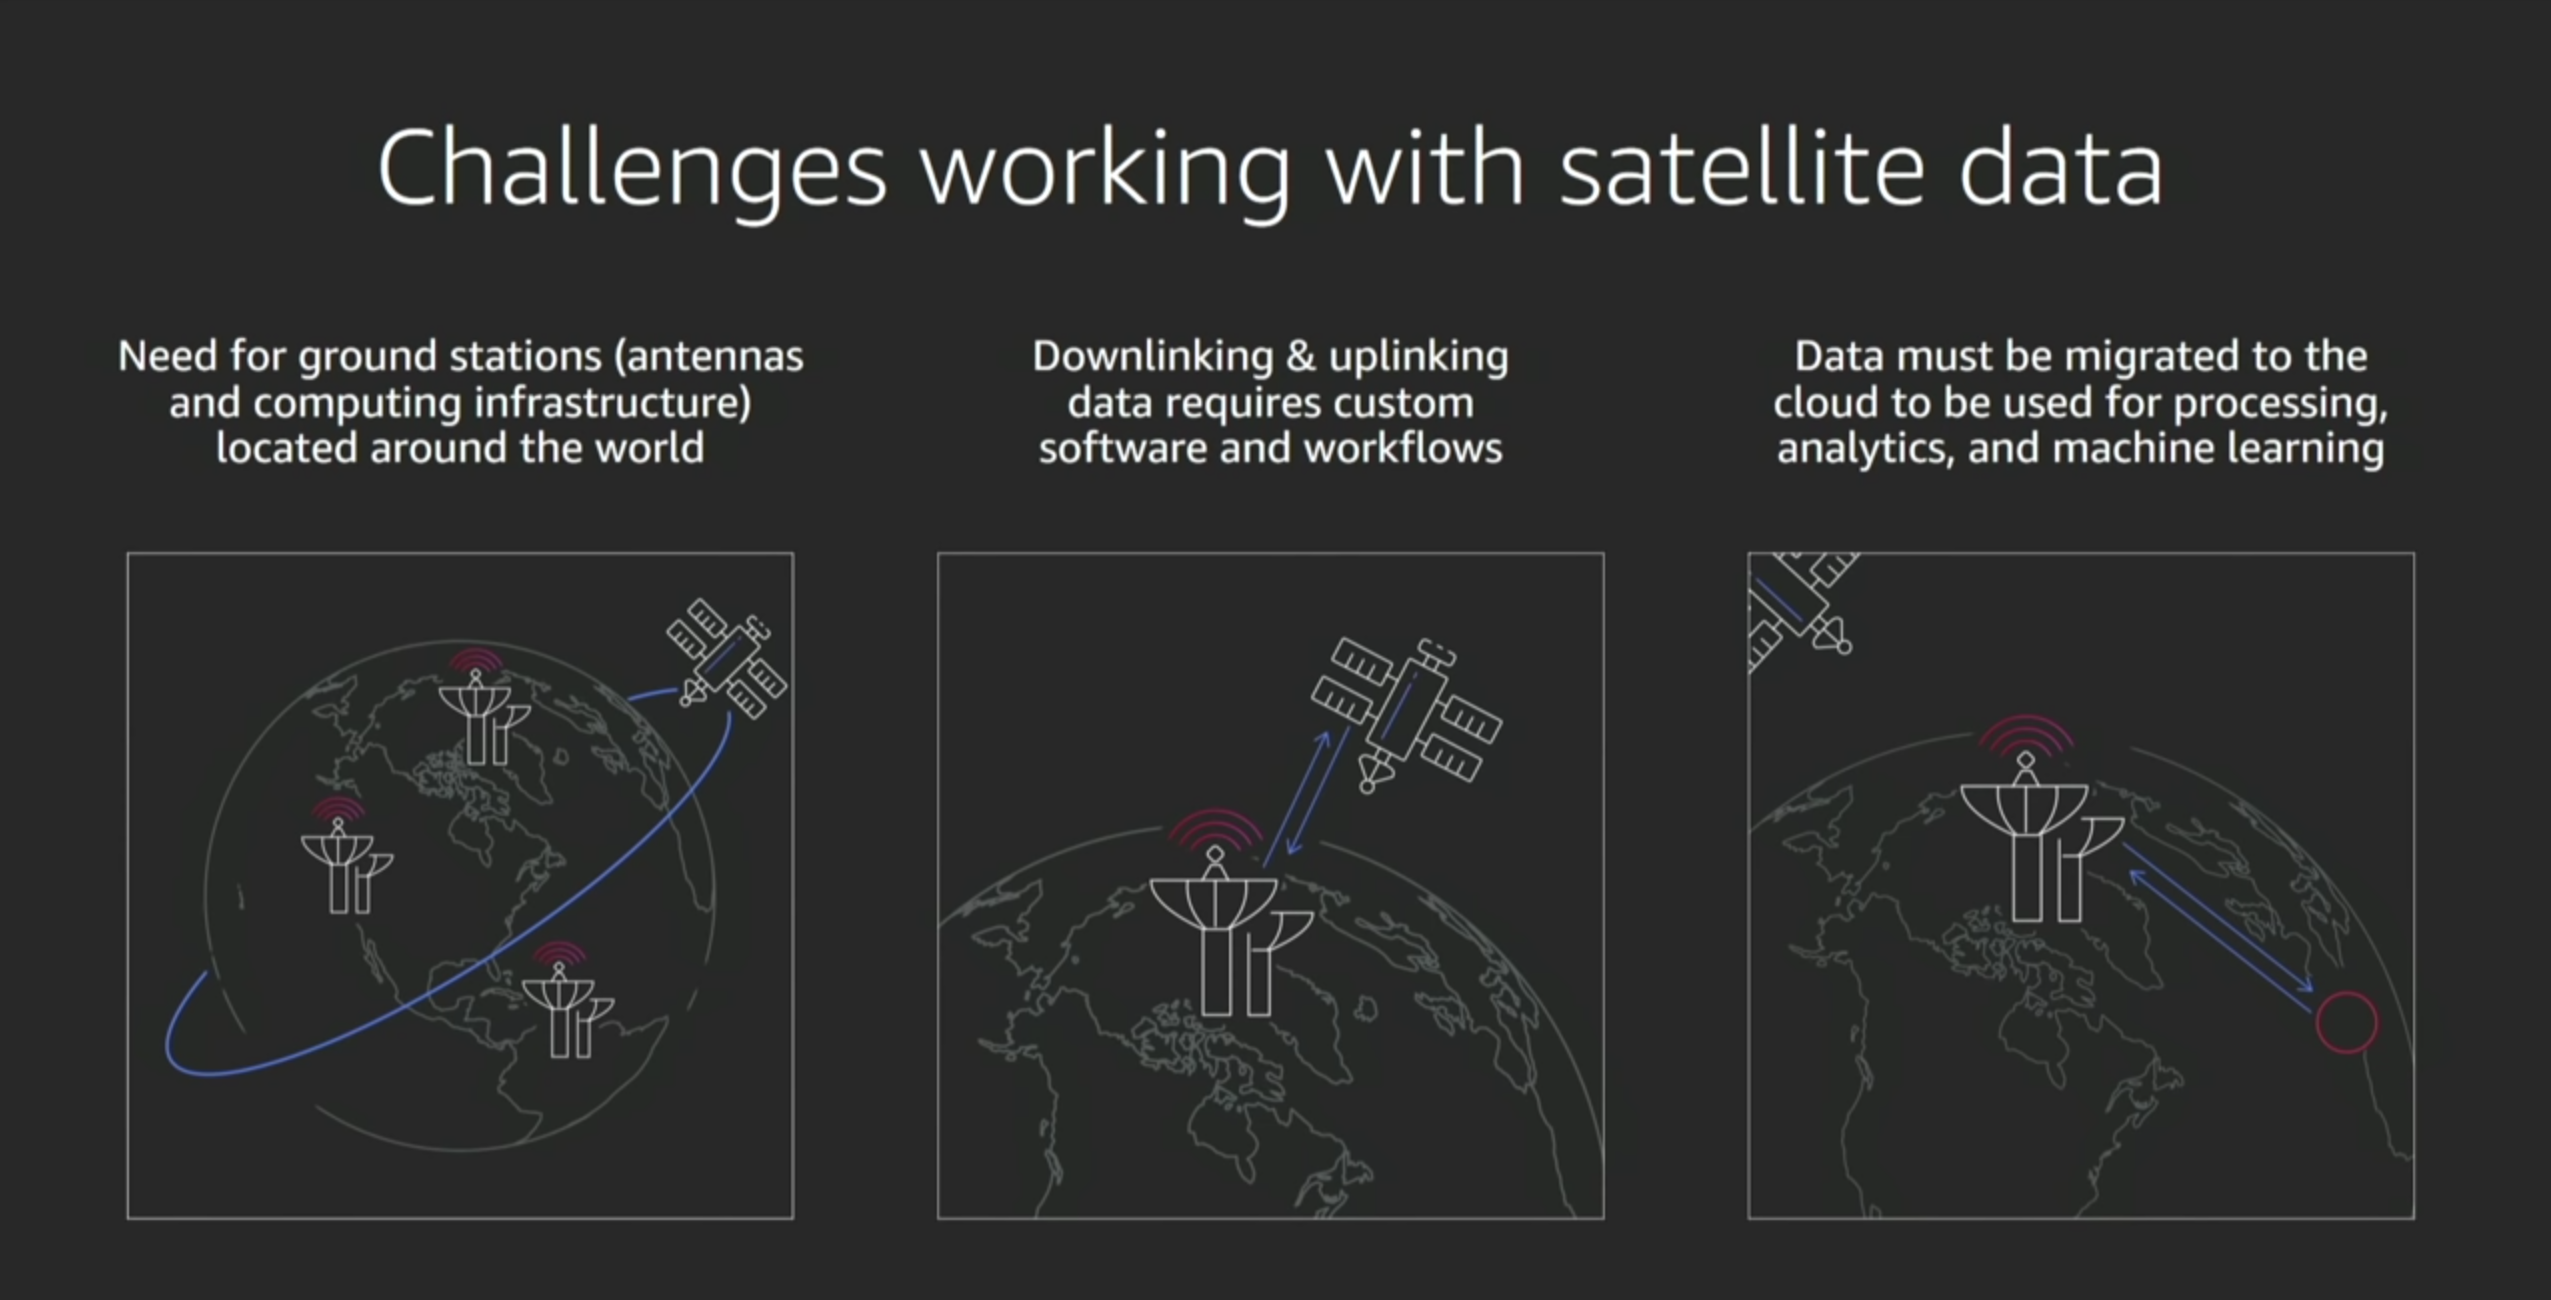 Summary of satellite data infrastructure / processing challenges. Source: [AWS re:Invent 2019](https://www.youtube.com/watch?v=_MwNgO0aJo0&feature=emb_logo)